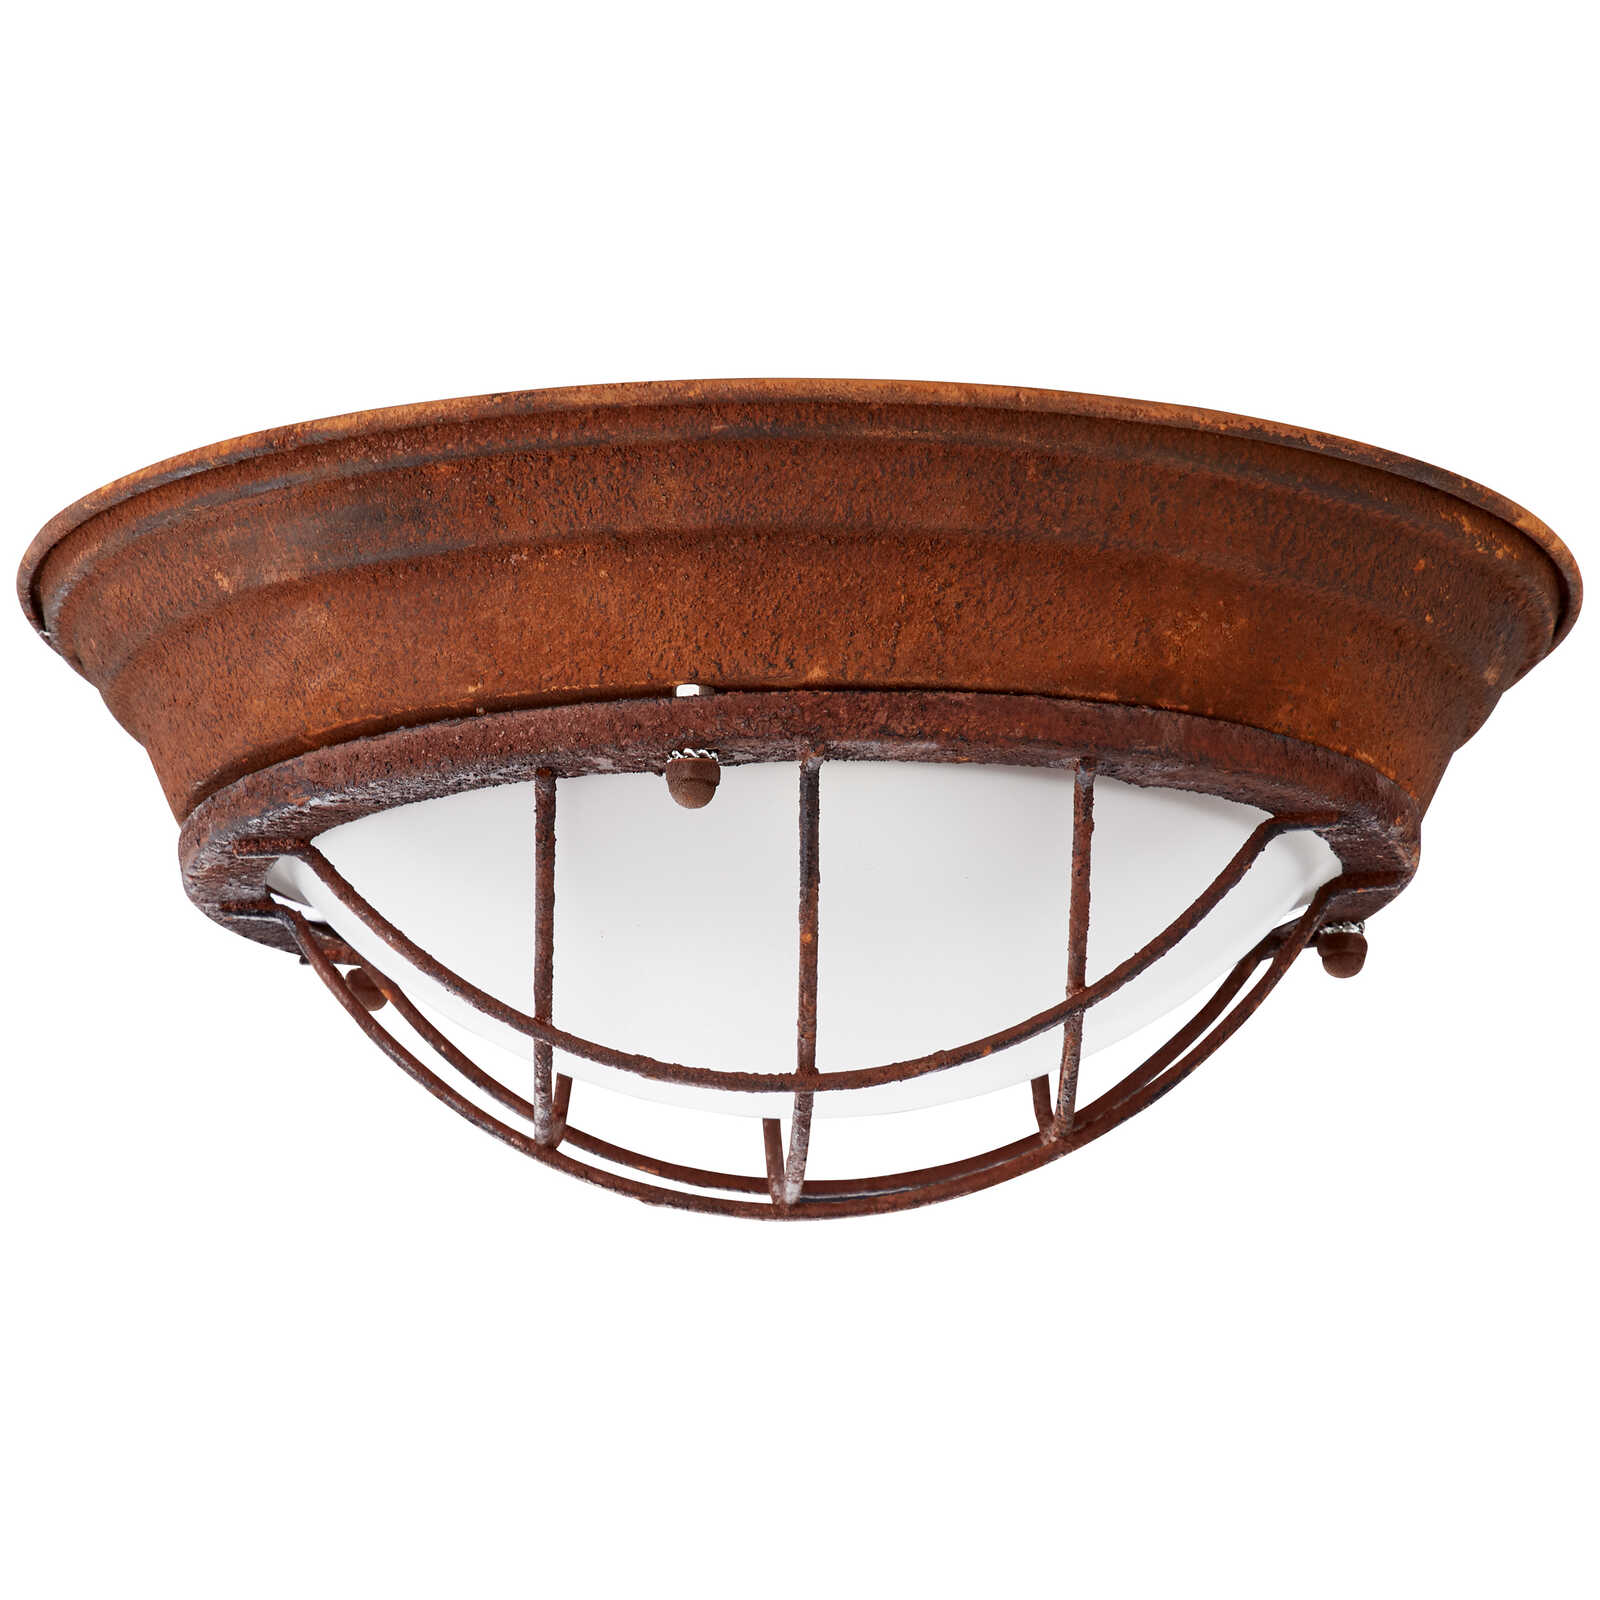             Glass wall and ceiling light - Sina 2 - Brown
        